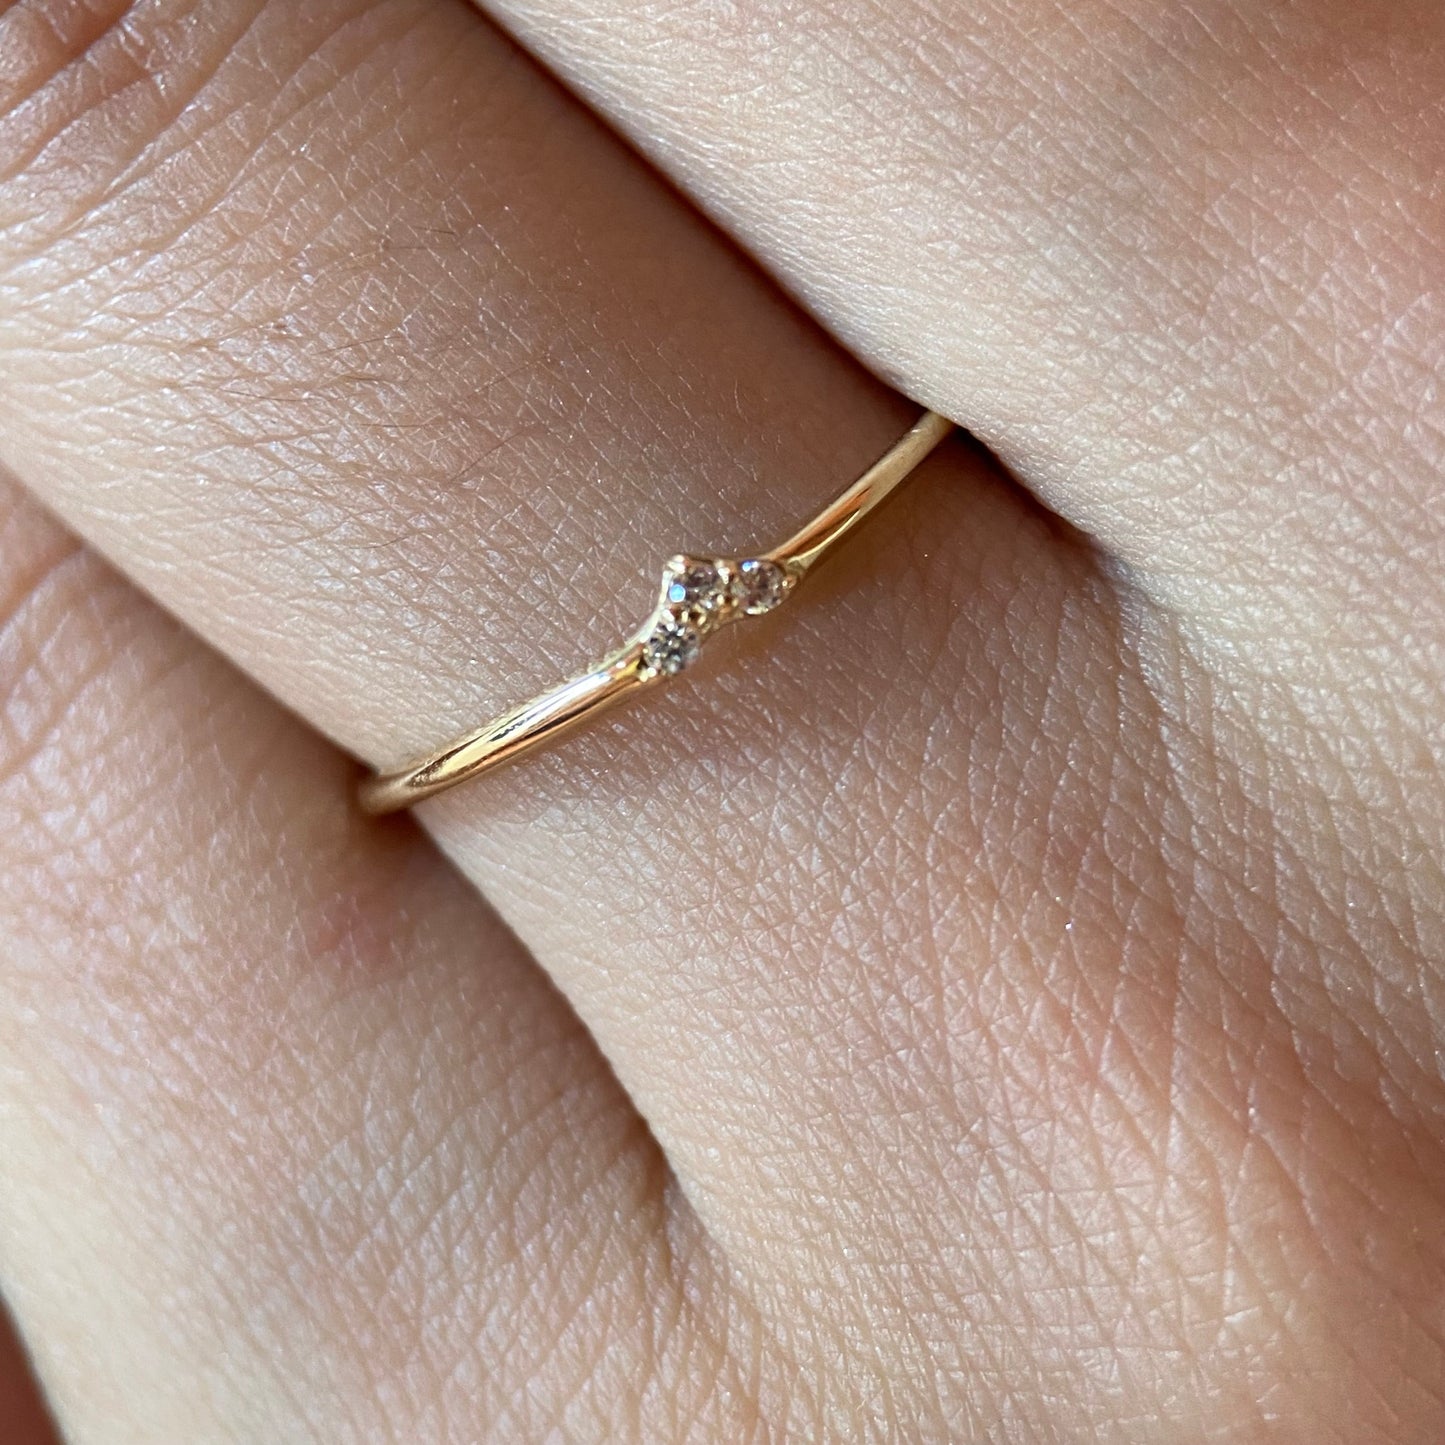 Angeline Ring in 10k Yellow Gold